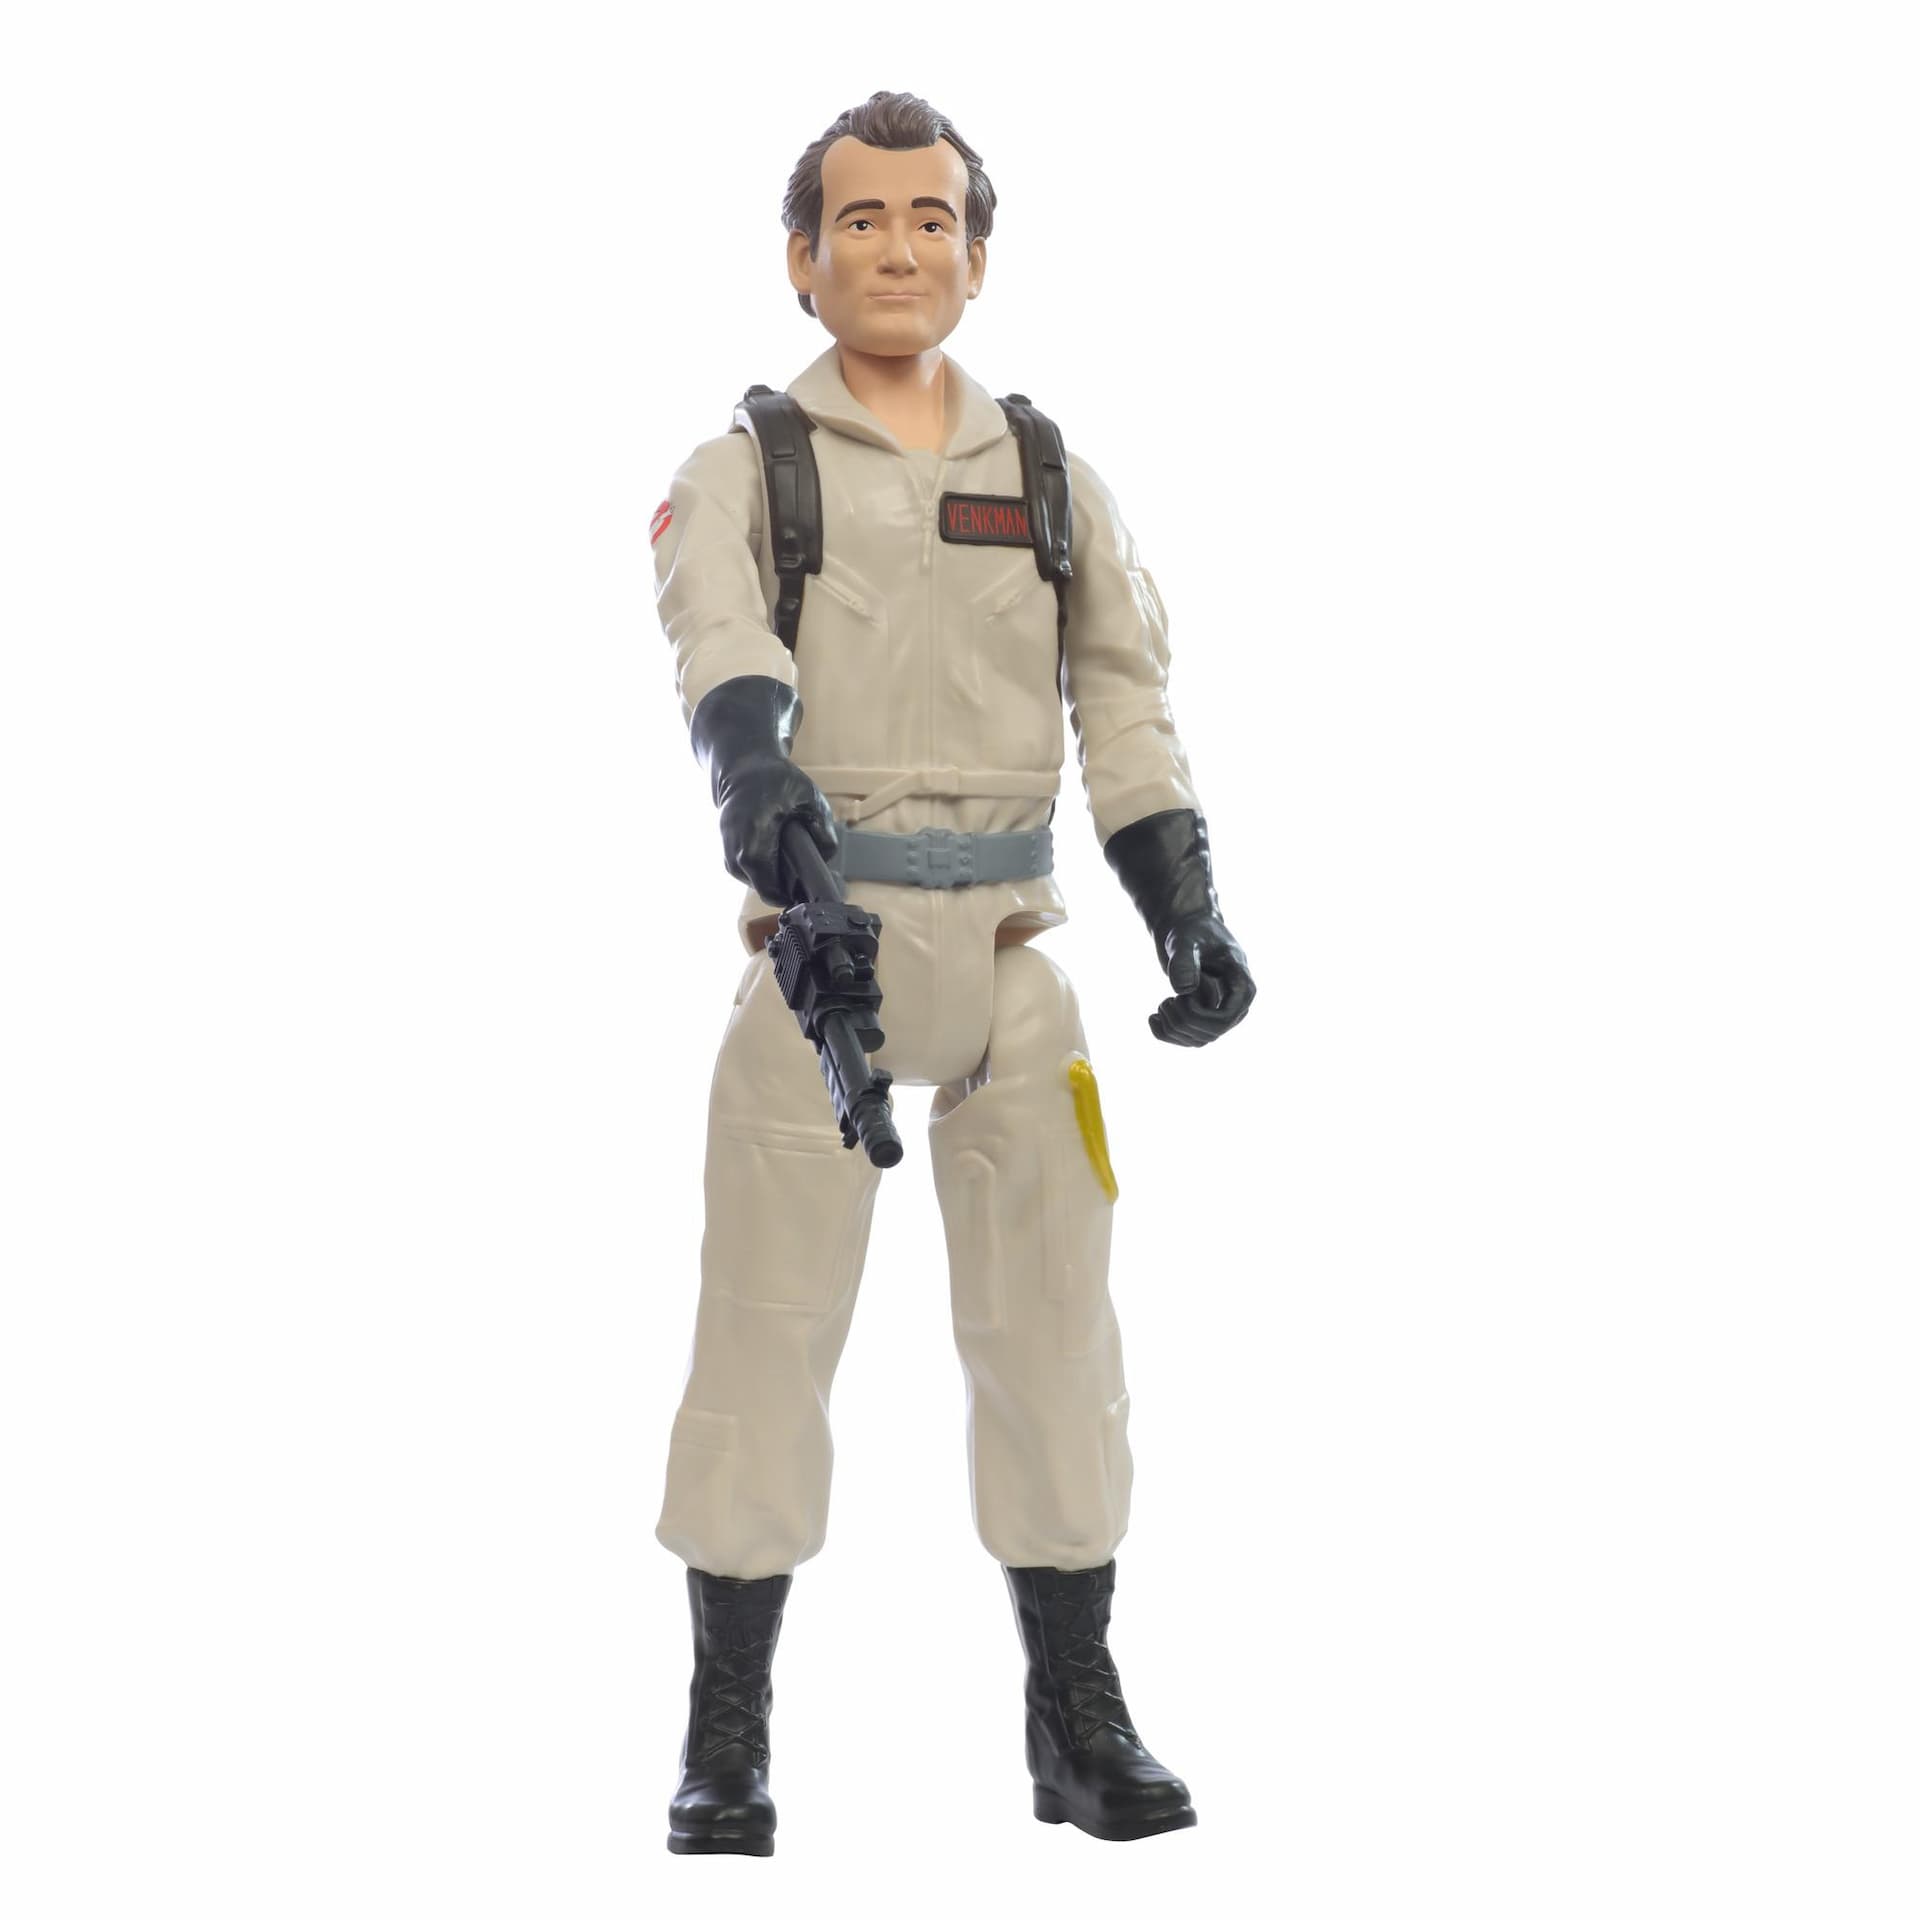 Ghostbusters Peter Venkman Toy 12-Inch-Scale Collectible Classic 1984 Ghostbusters Figure, Toys for Kids Ages 4 and Up